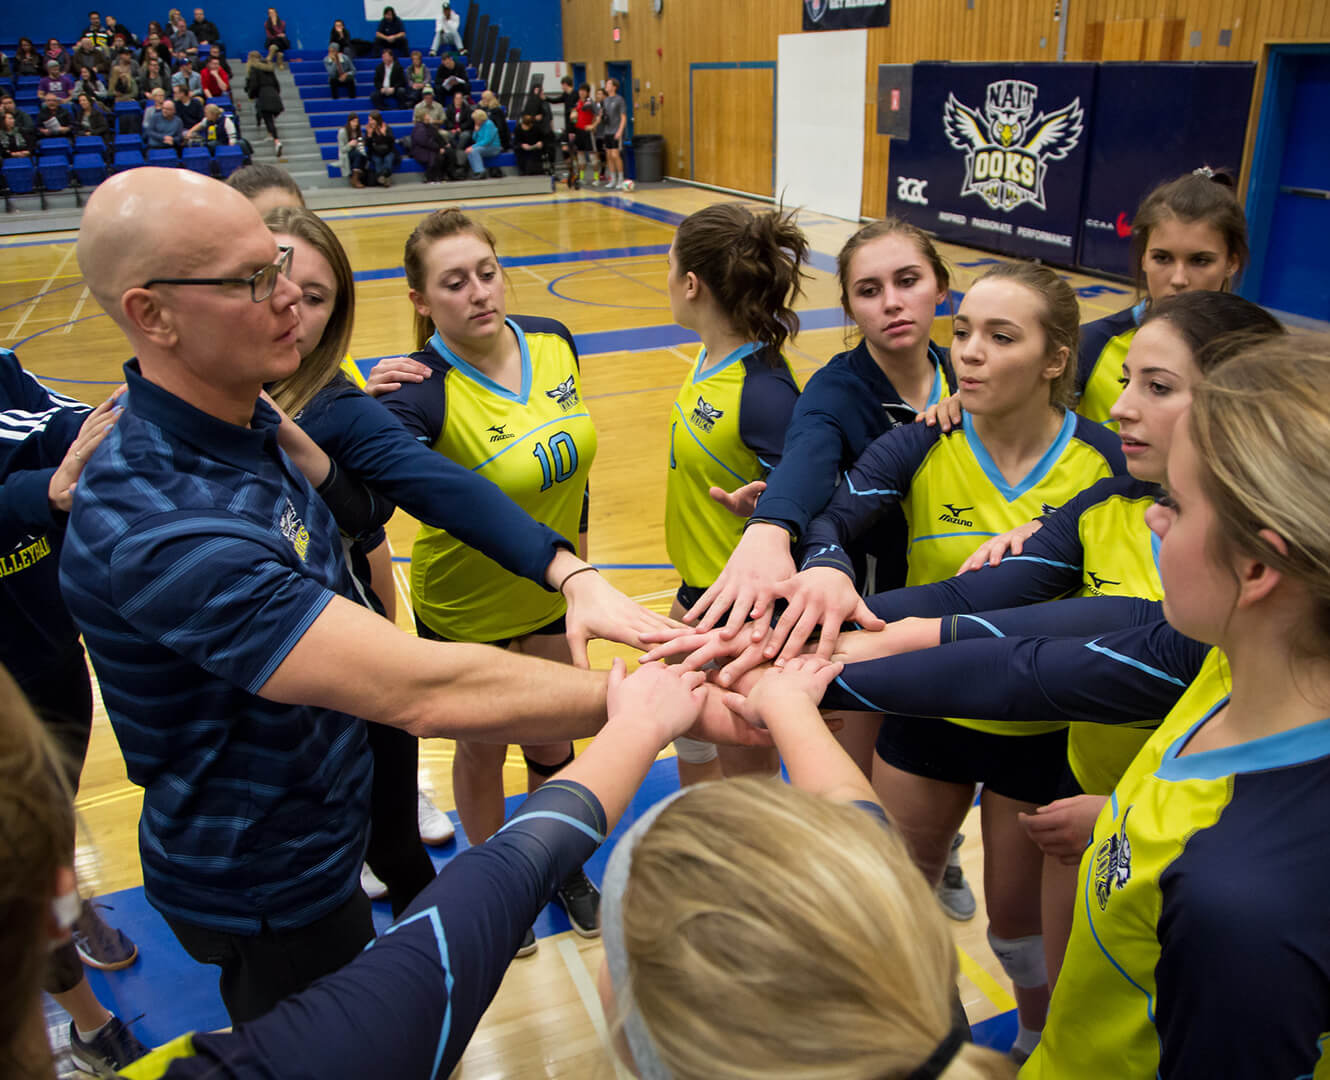 NAIT Women's volleyball team prepare for a game